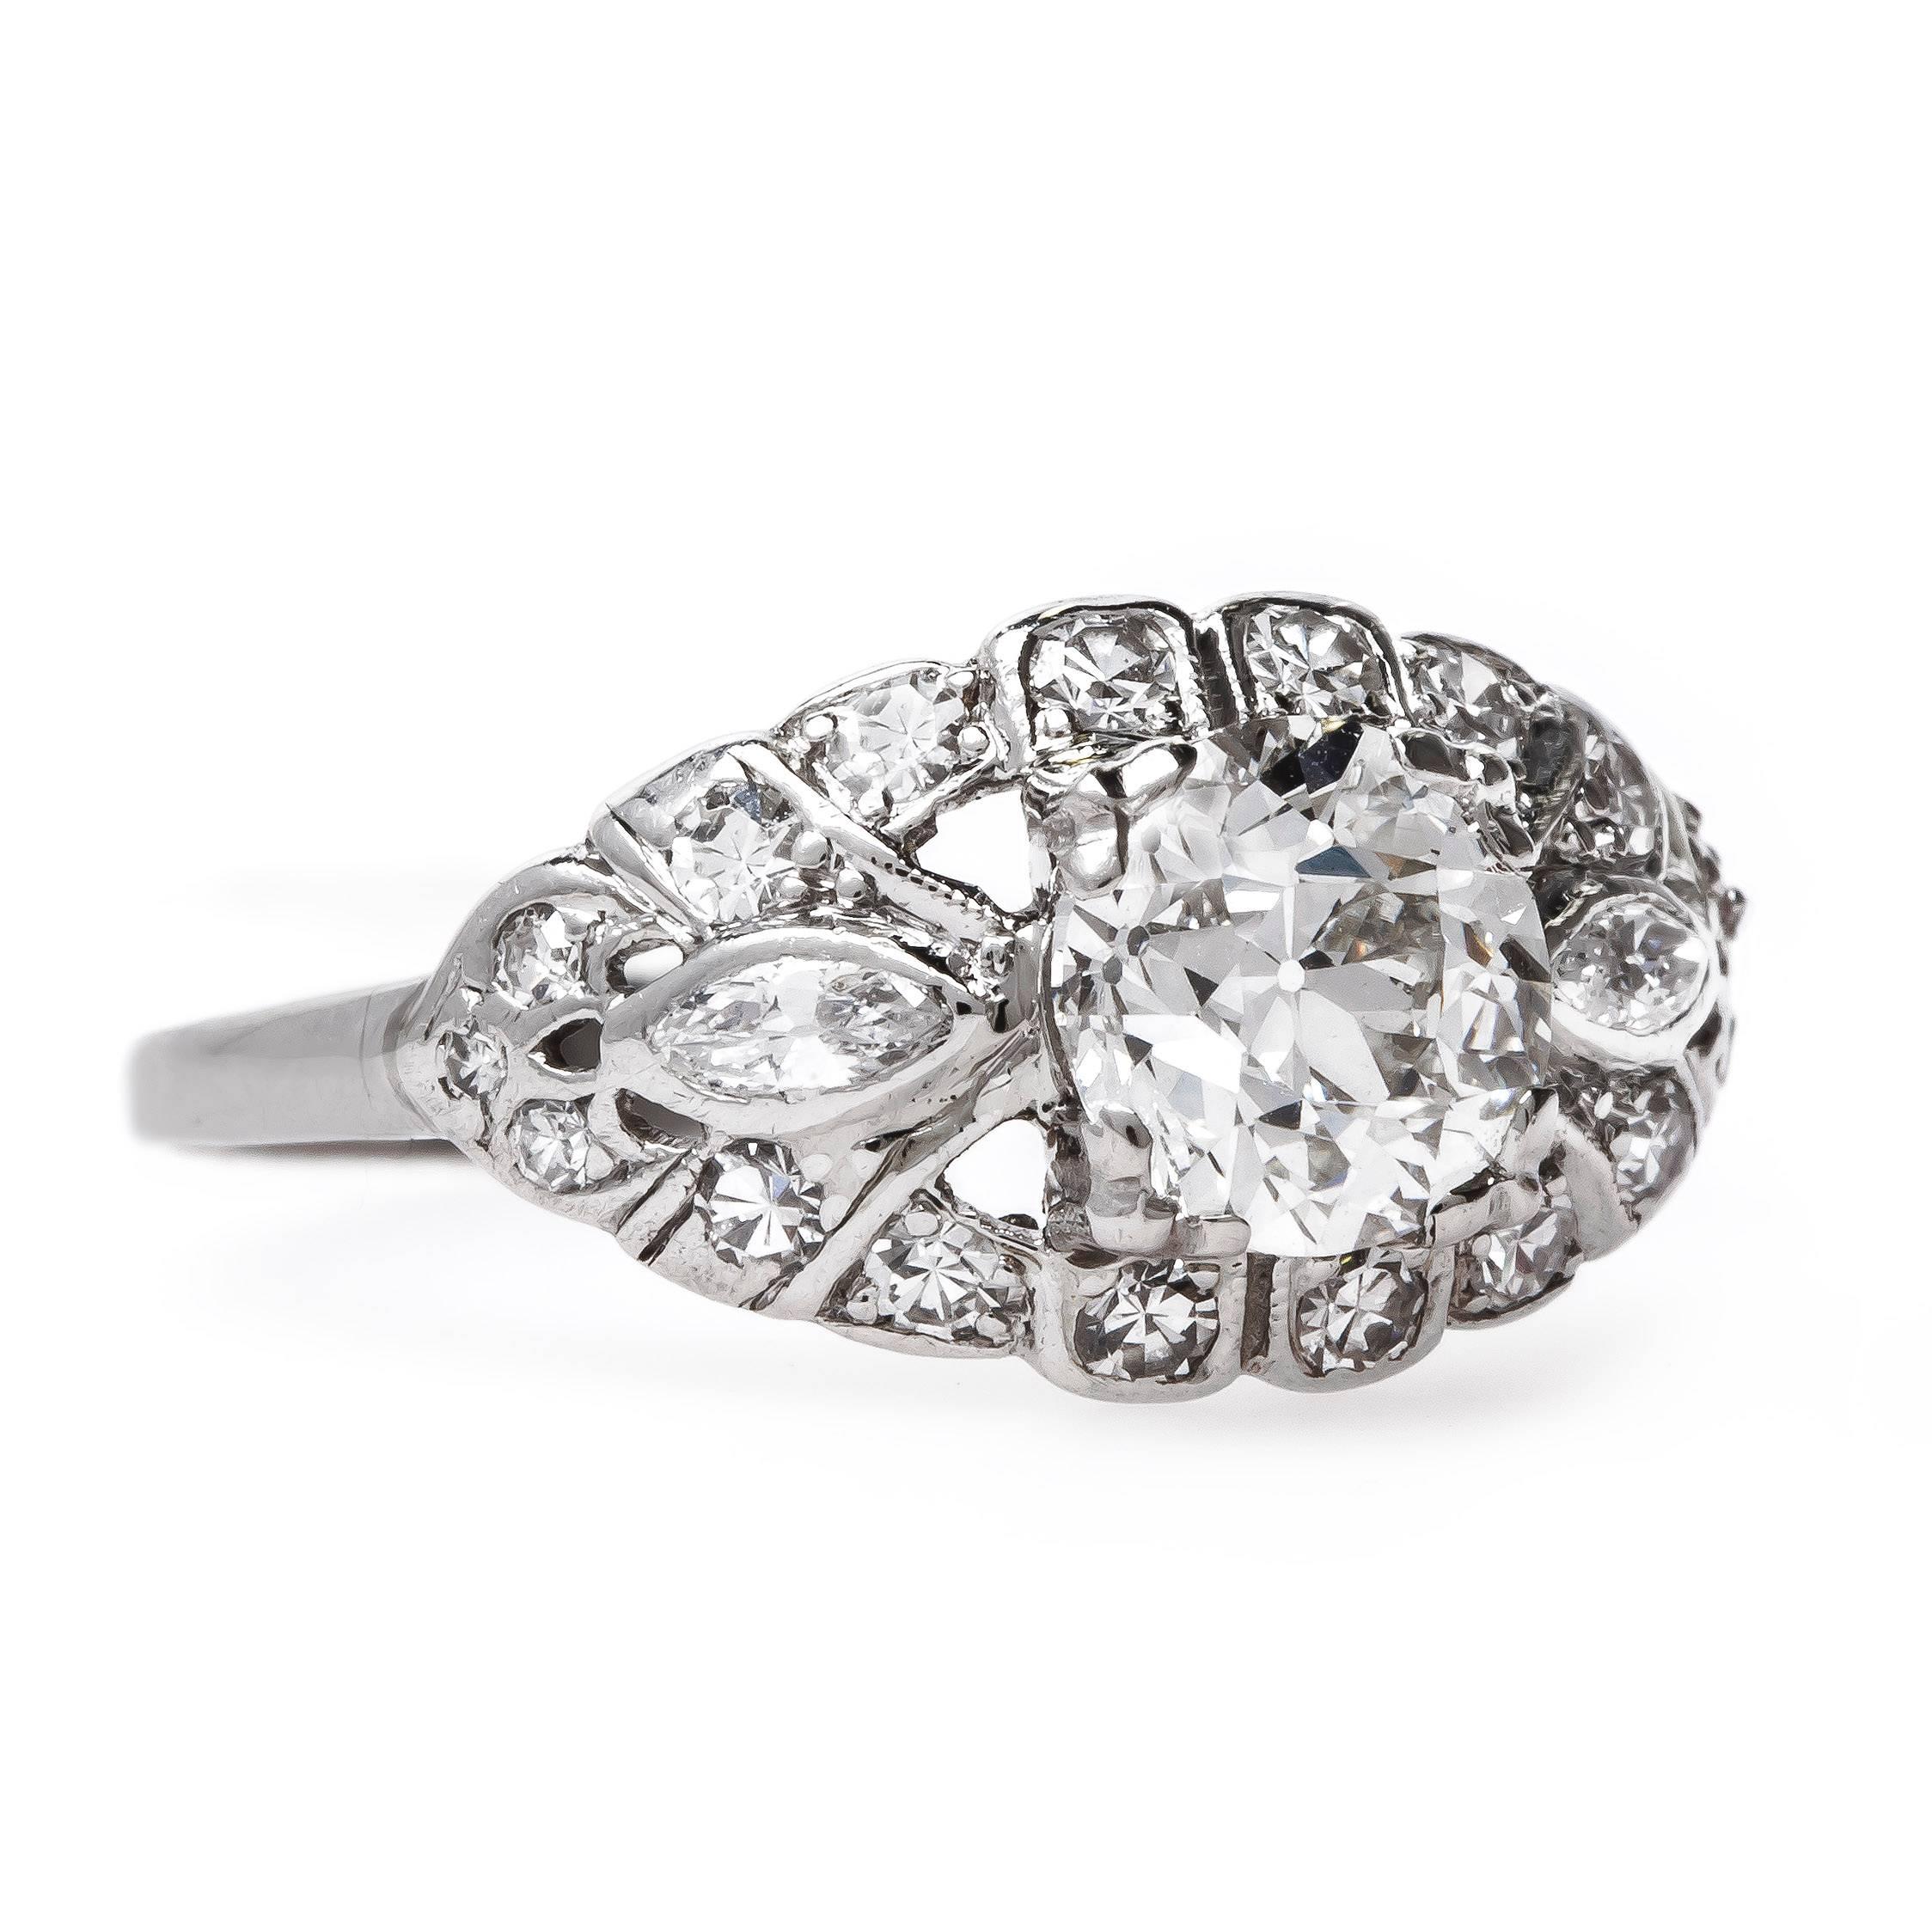 Kingsway is a stunning one-of-a-kind vintage engagement ring reflecting true Art Deco (circa 1930) design! The gorgeous platinum ring centers a 1.11ct EGL certified Old European Cut diamond graded I color and VS1 clarity. The glimmering main diamond